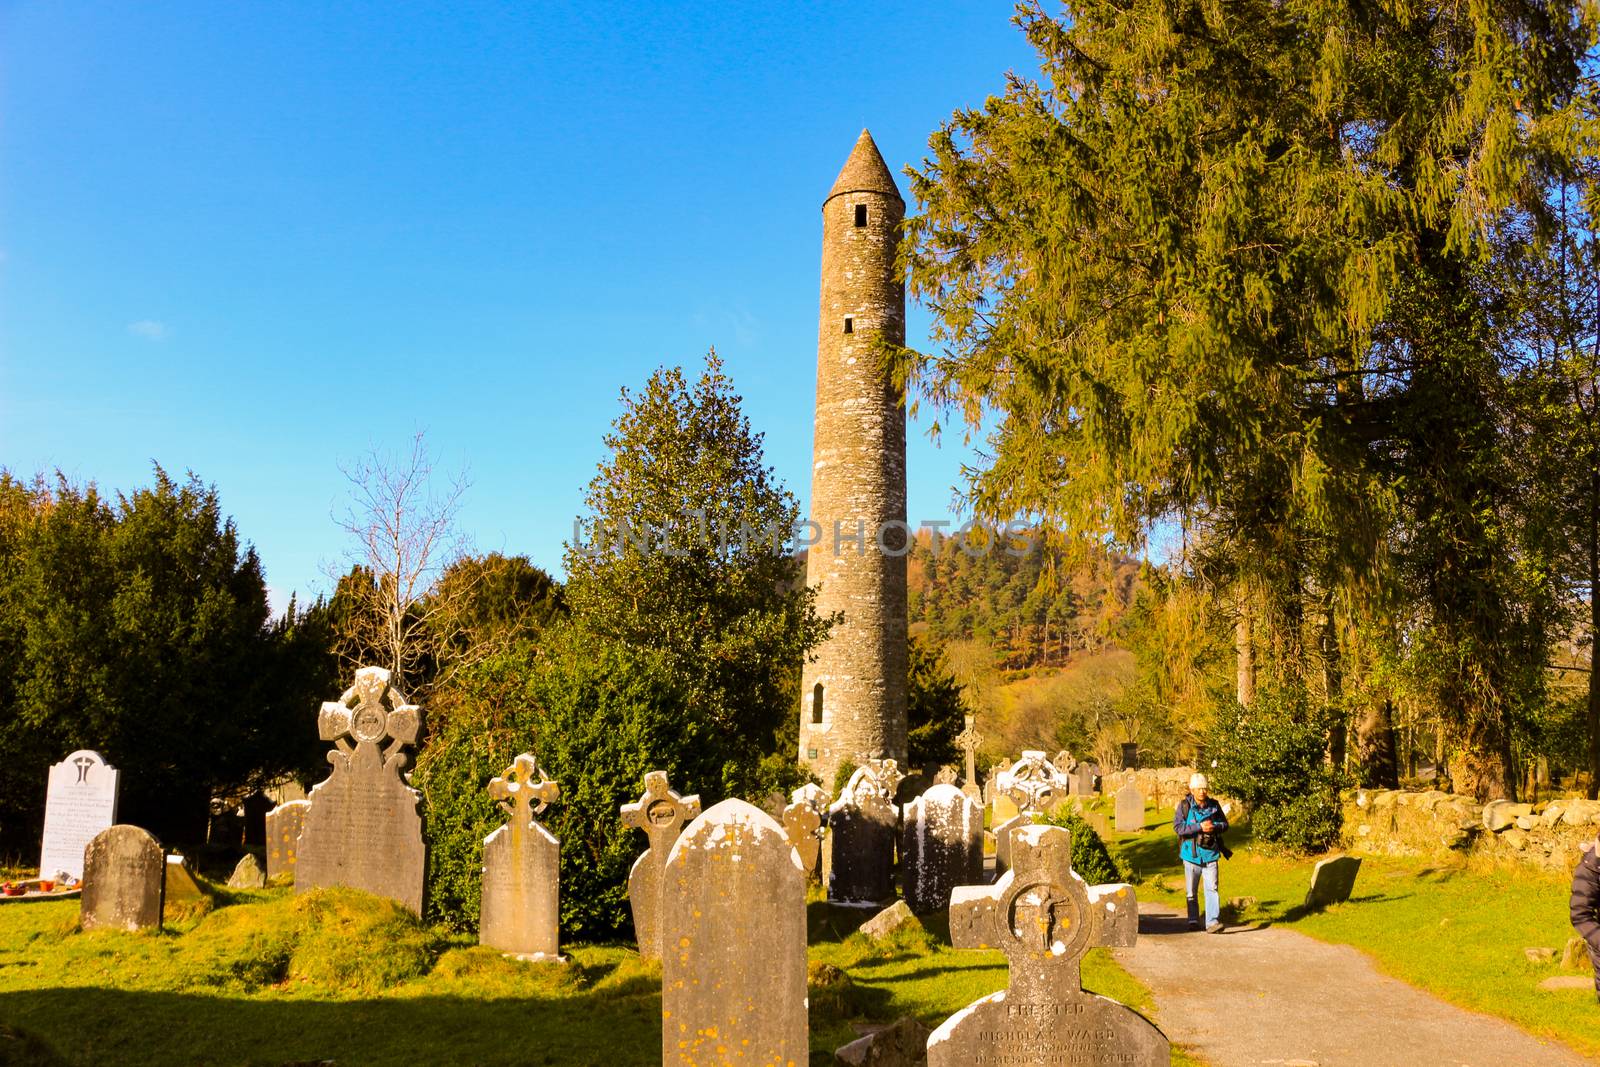 photo of St. Kevin's monastic city at Glendalough famed for its rounds towers, and Celtic crosses by mynewturtle1